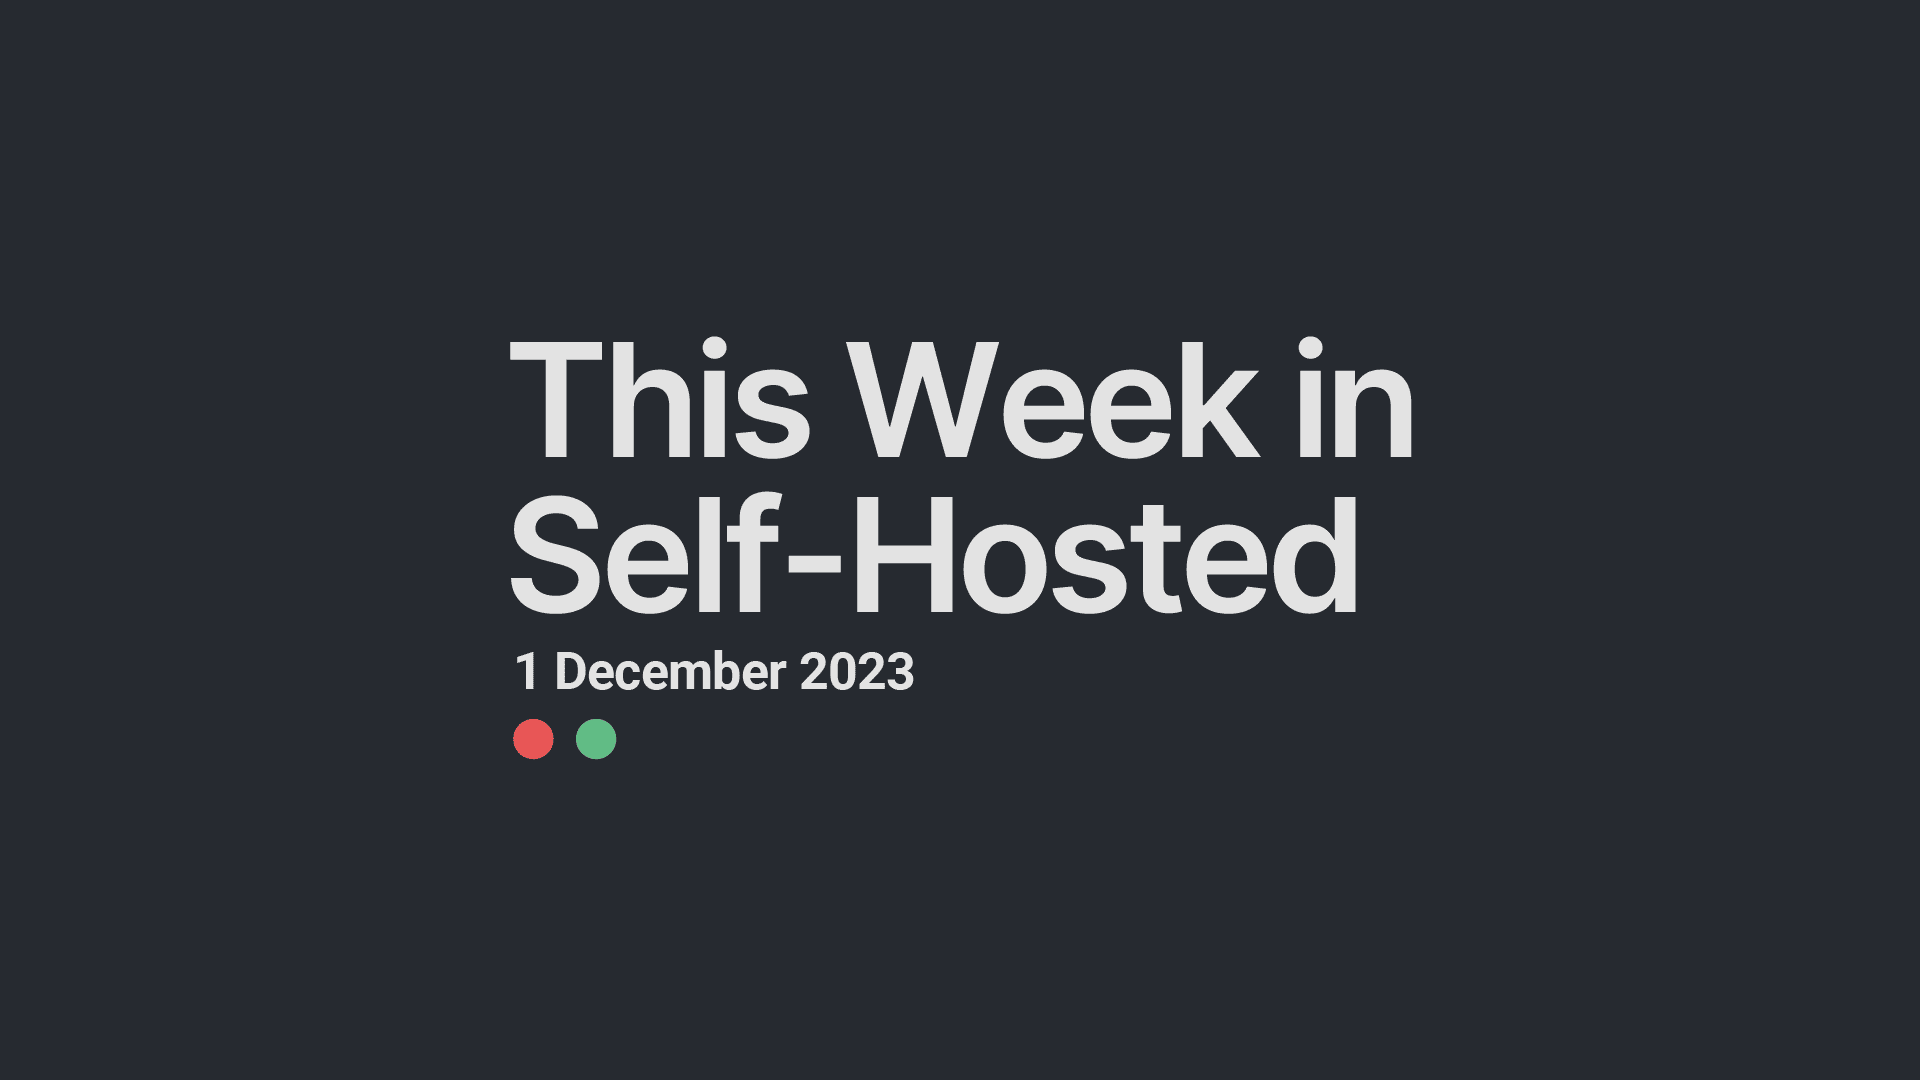 This Week in Self-Hosted (1 December 2023) Post image